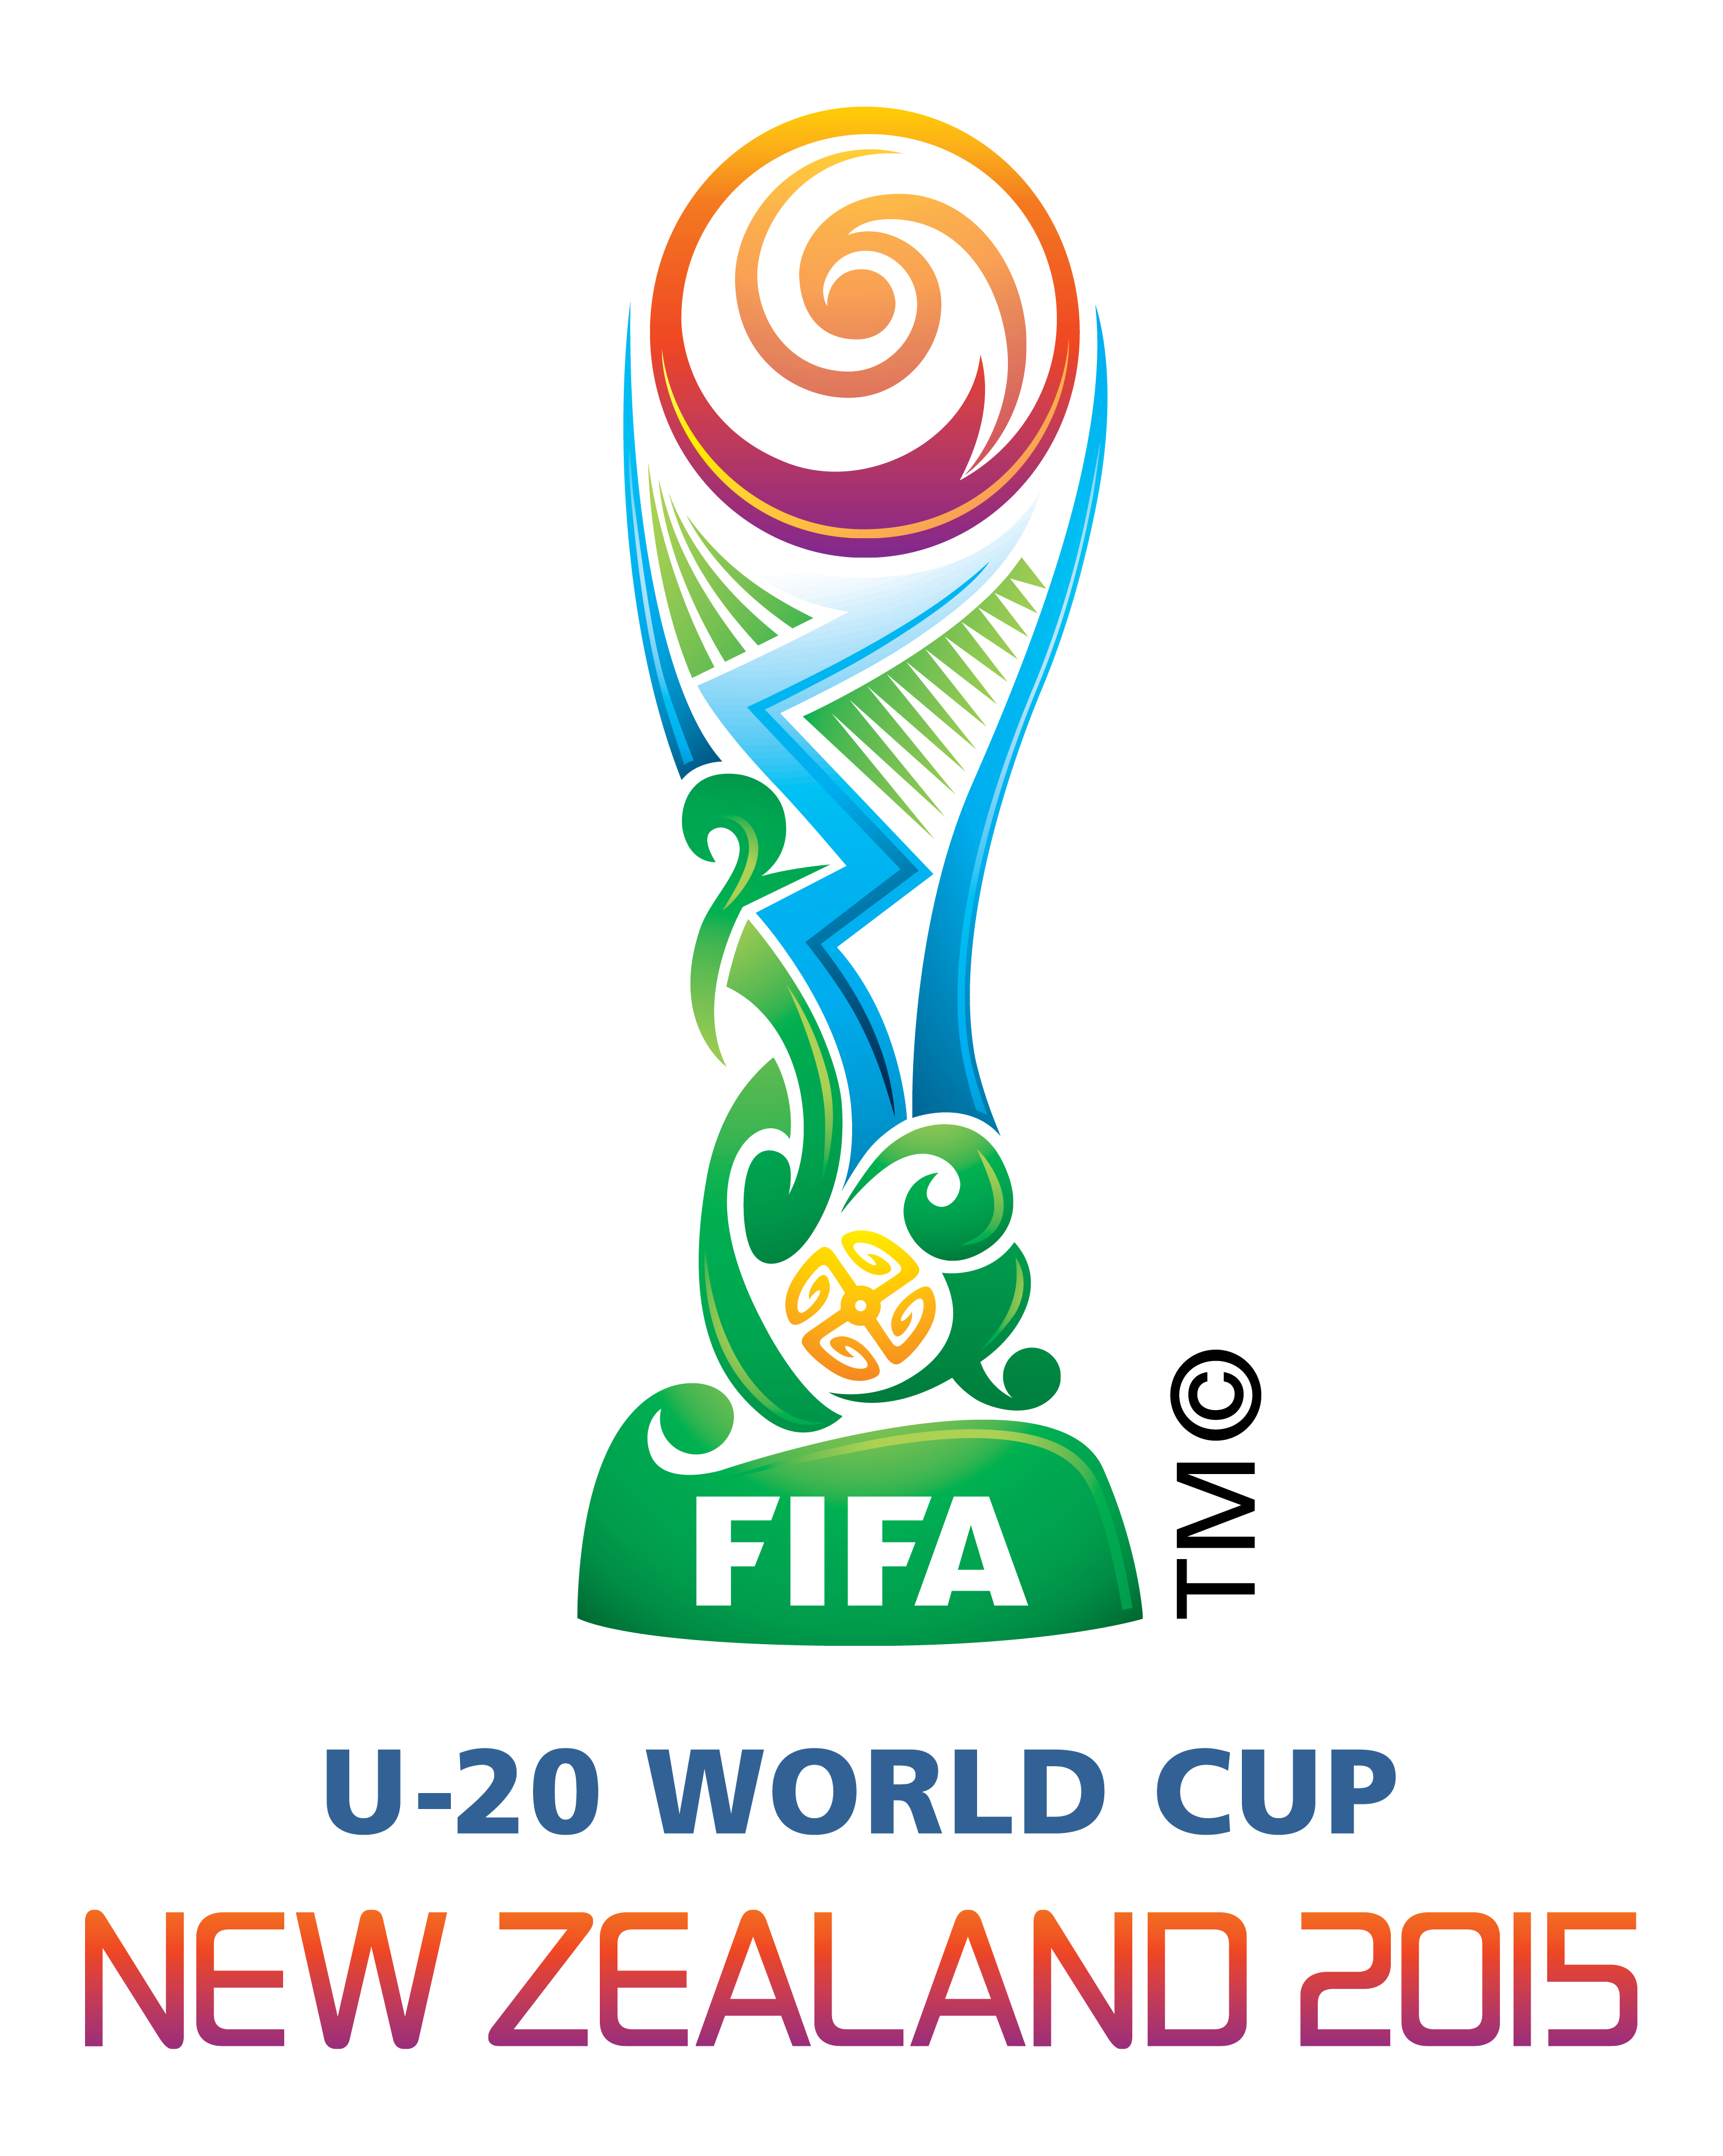 Media accreditation for the Official Draw for the FIFA U-20 World Cup New Zealand 2015